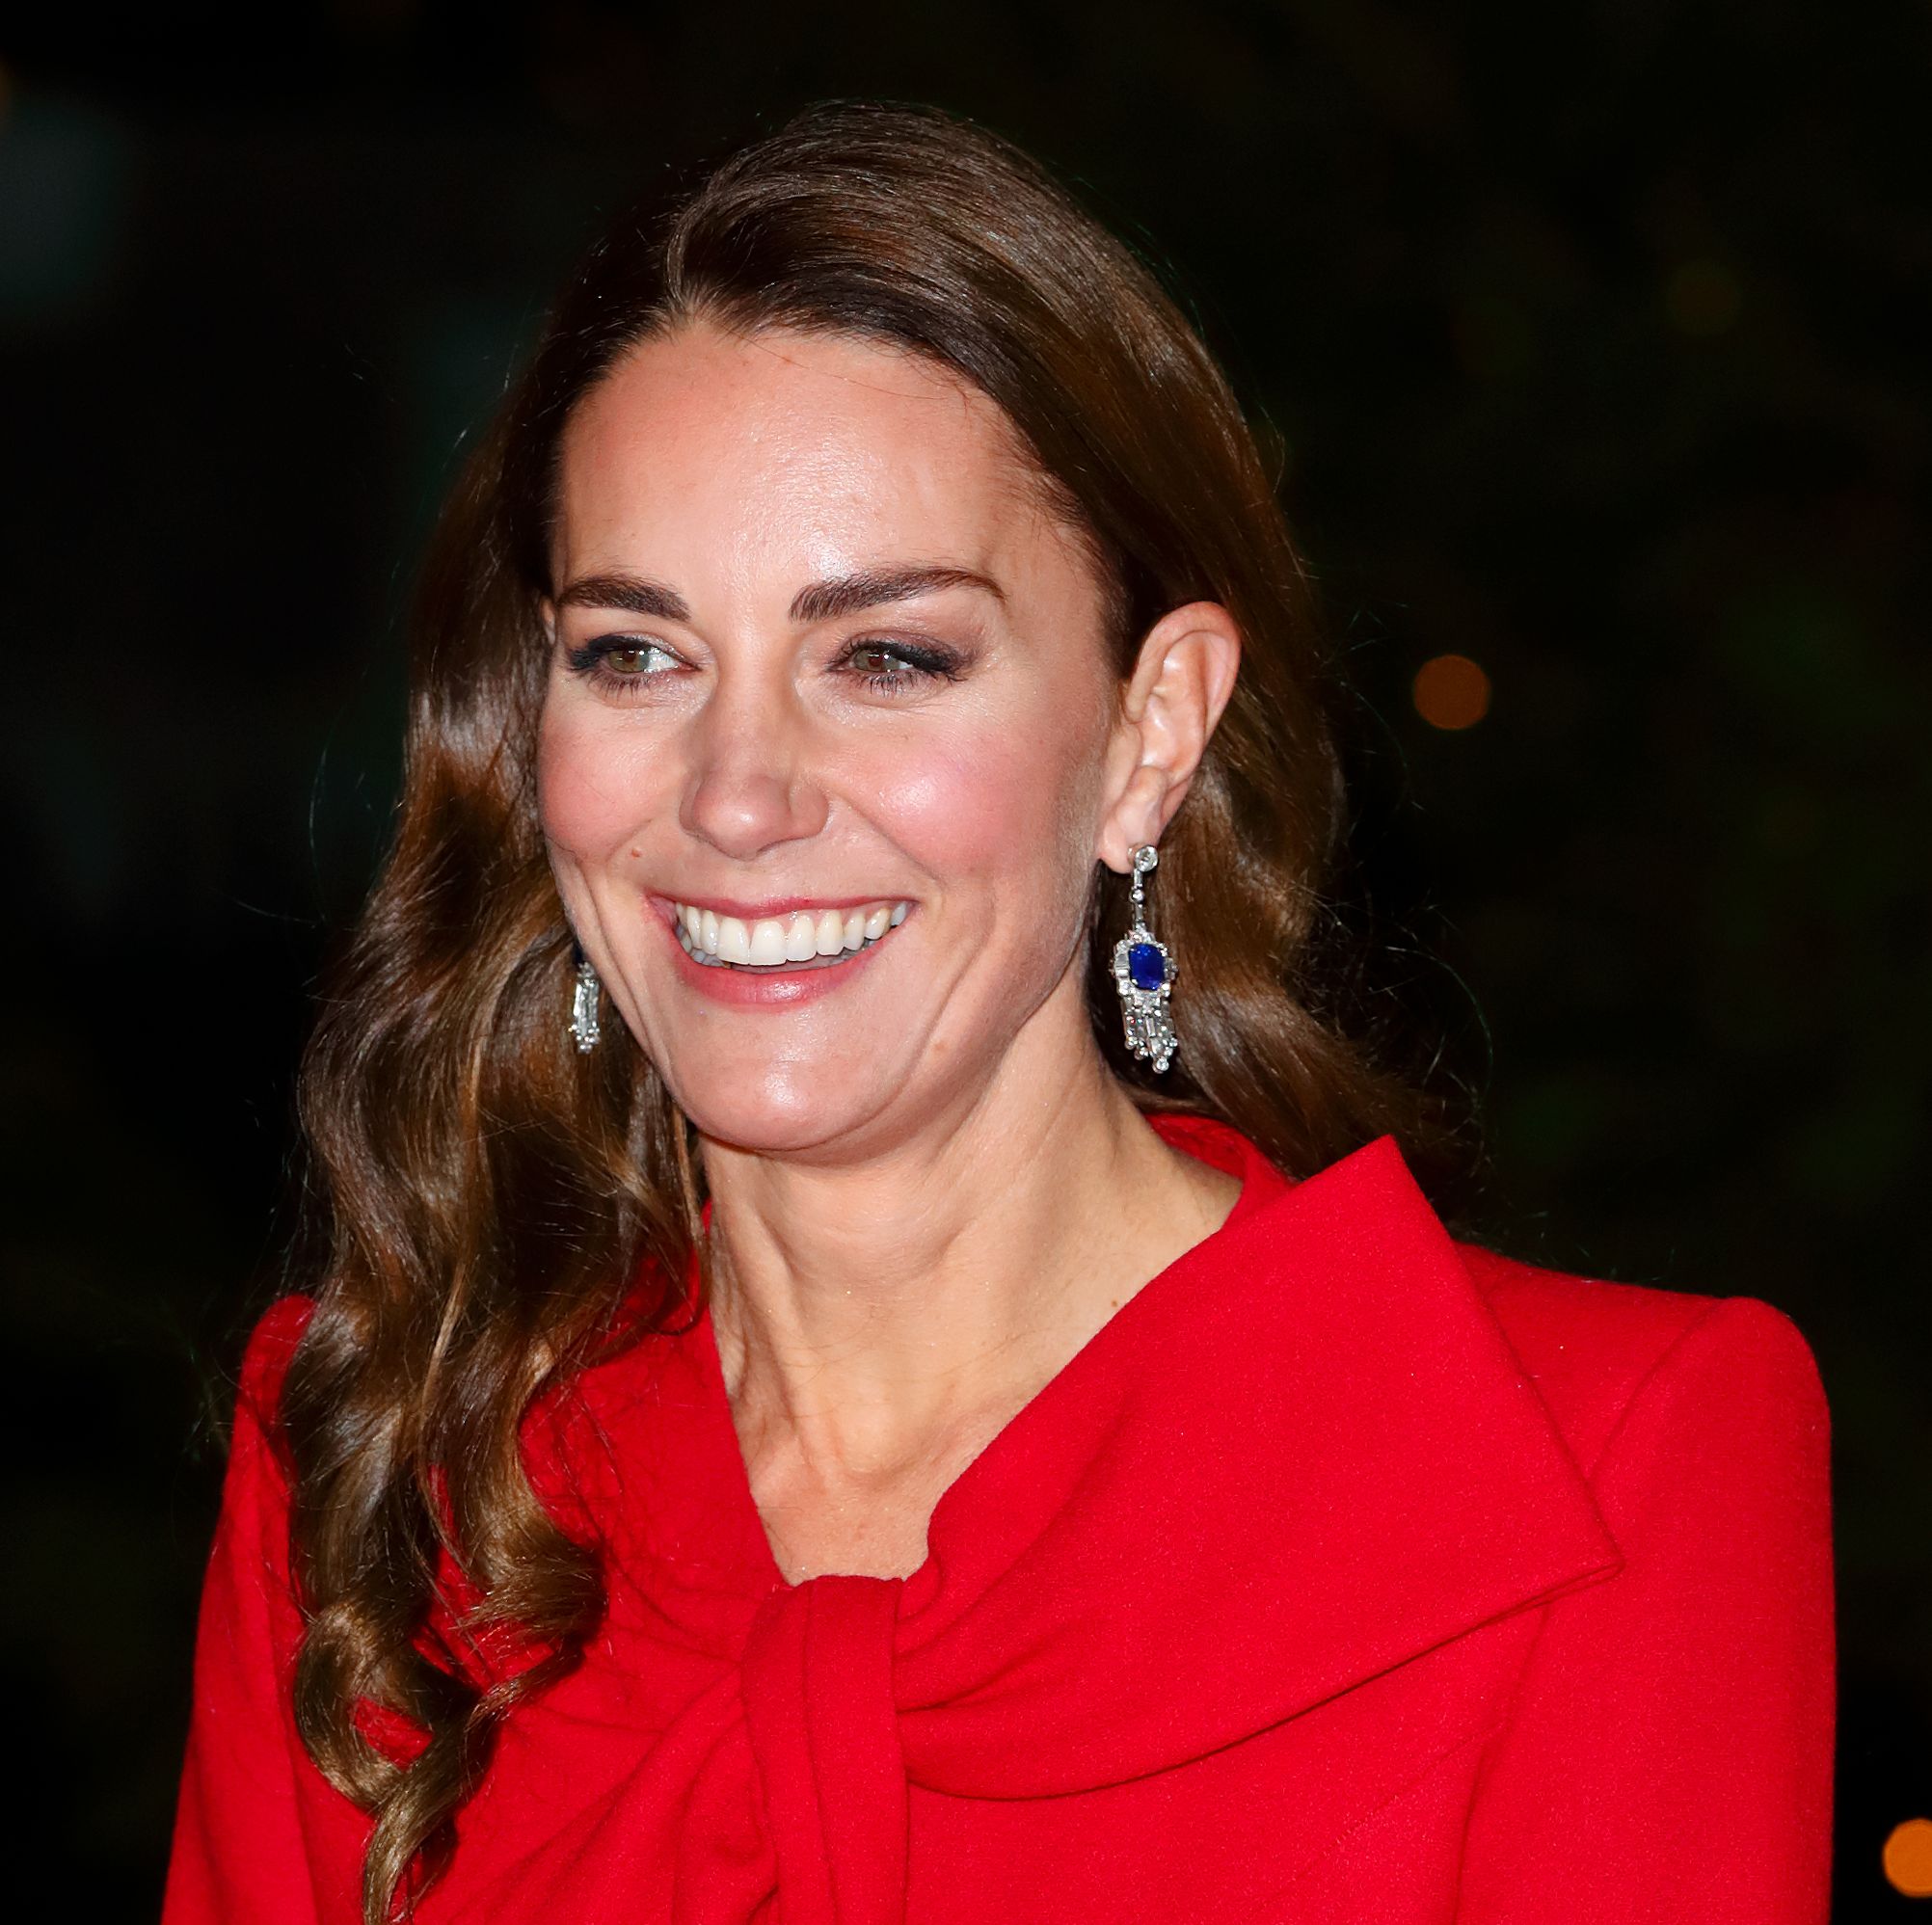 Kate Middleton Surprises the Crowd with Her Piano Skills in Christmas Concert Performance